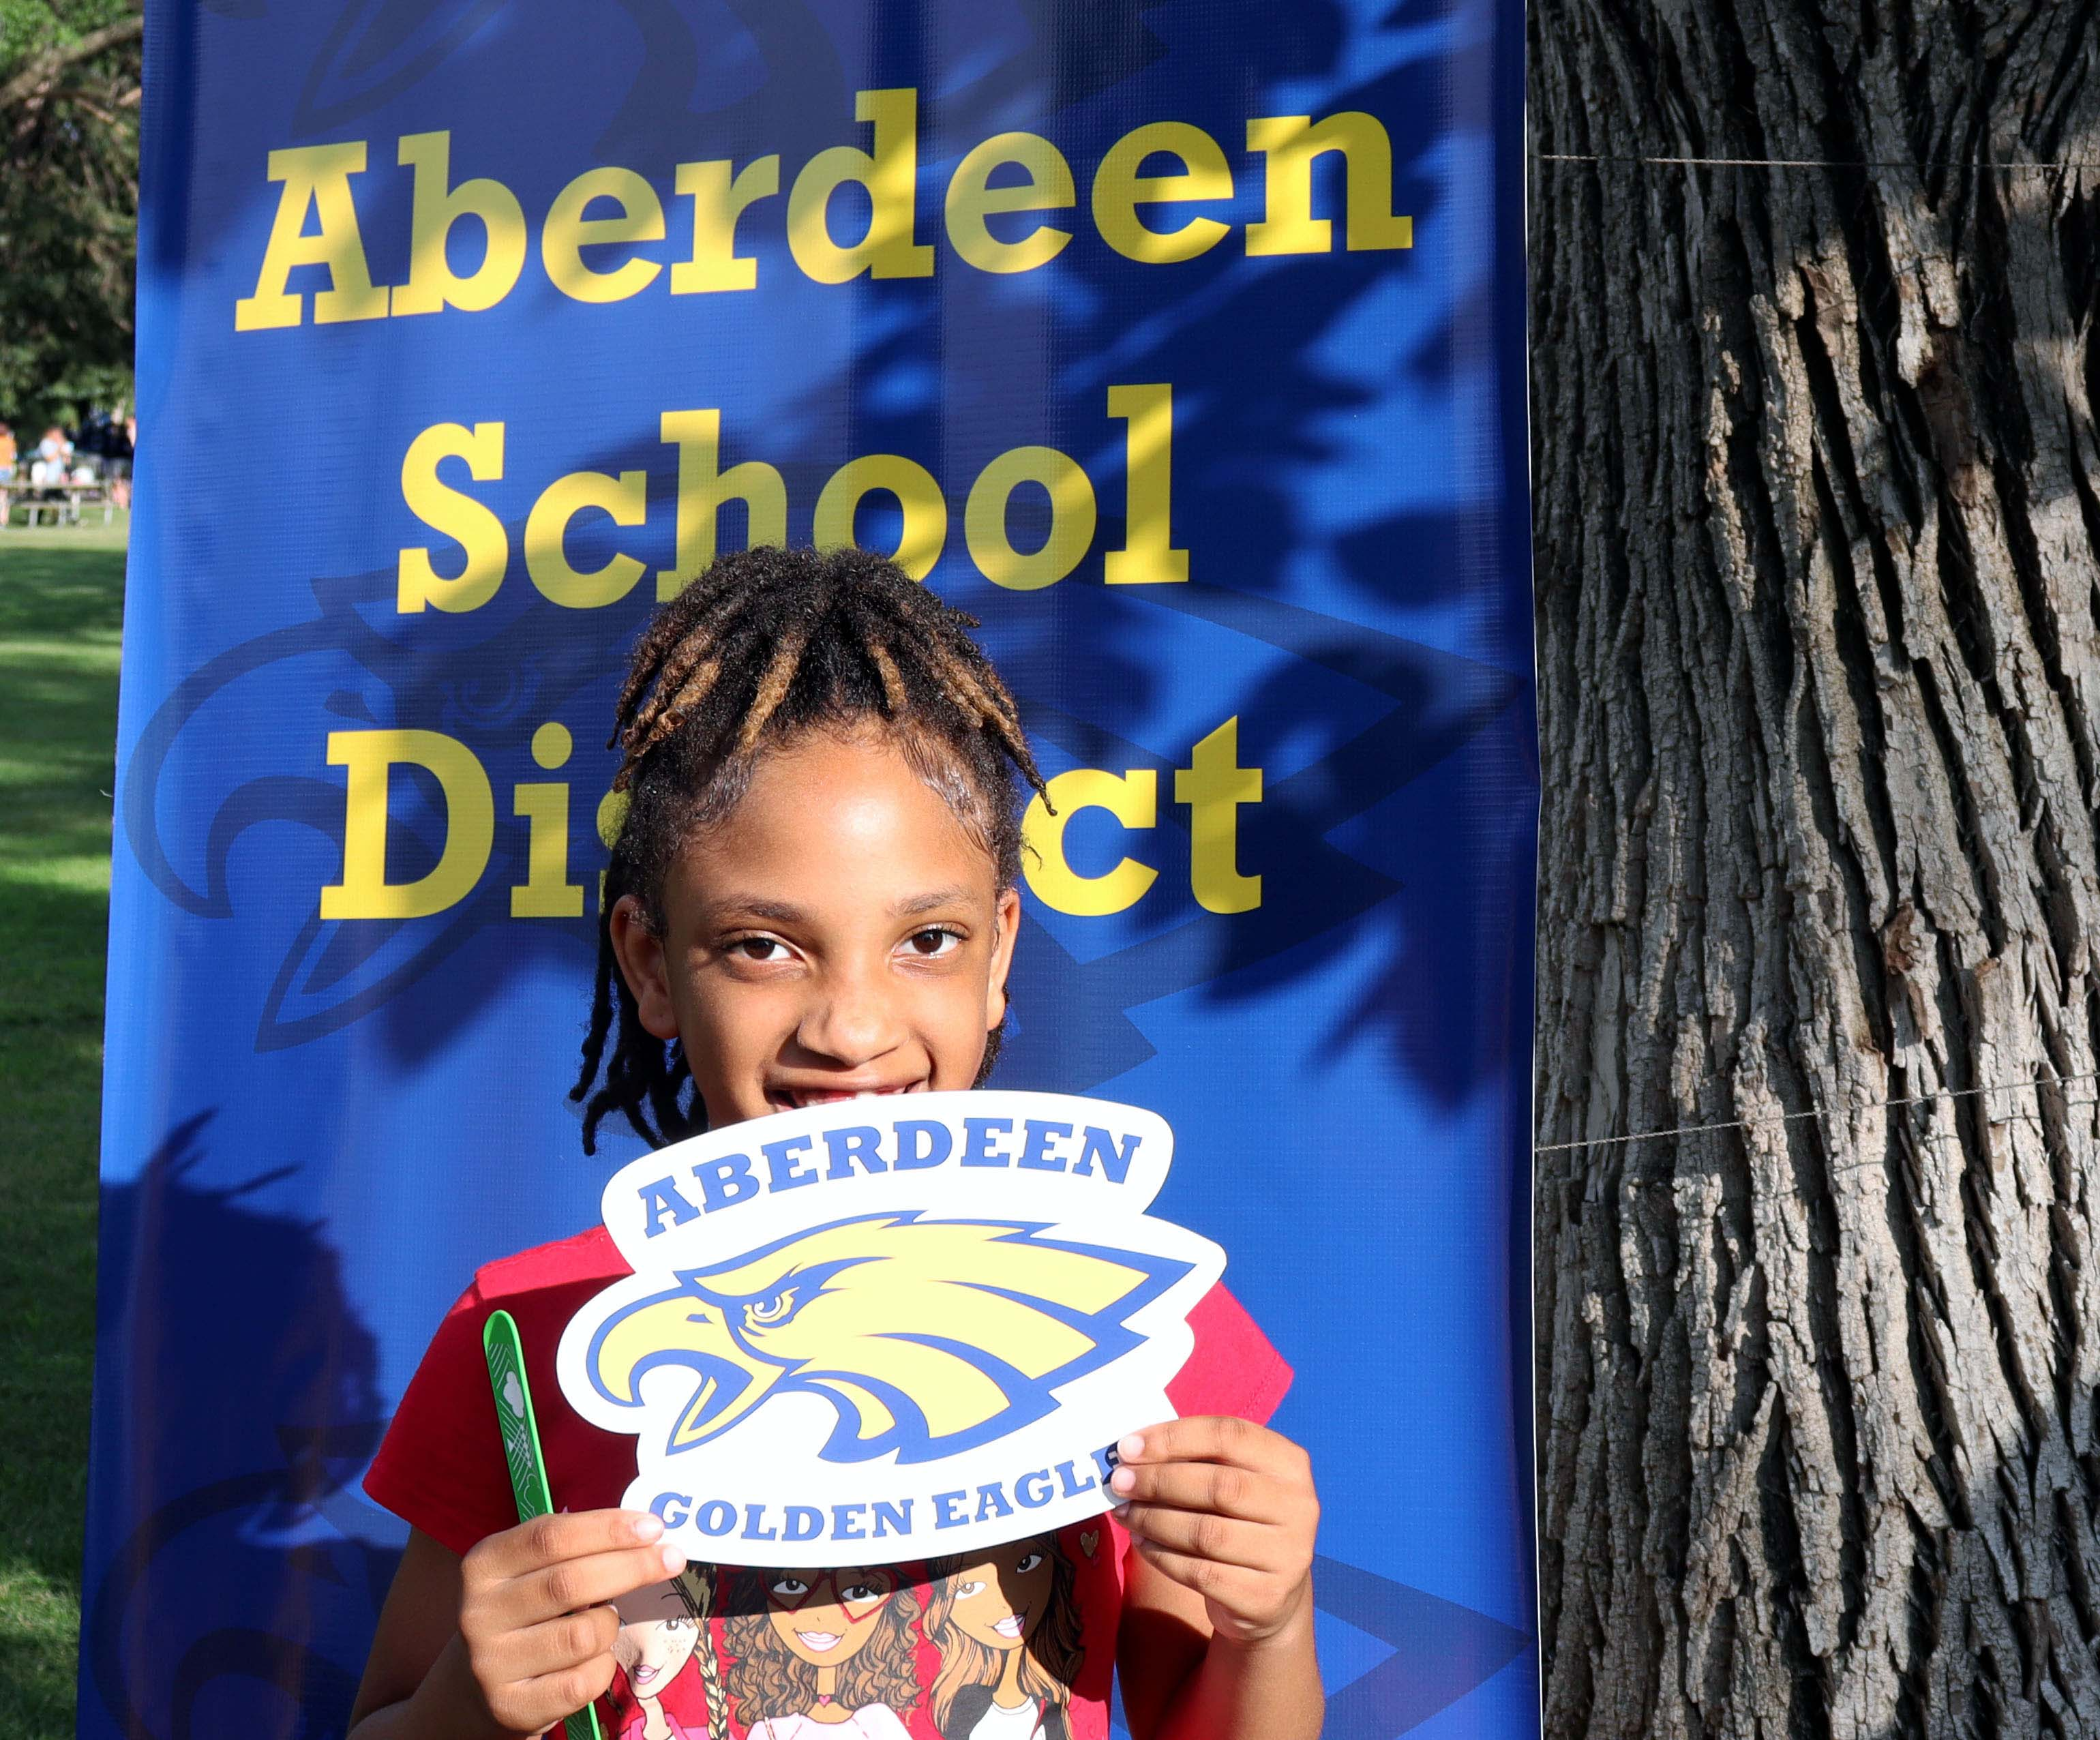 Student in the community in front of an Aberdeen School District backdrop